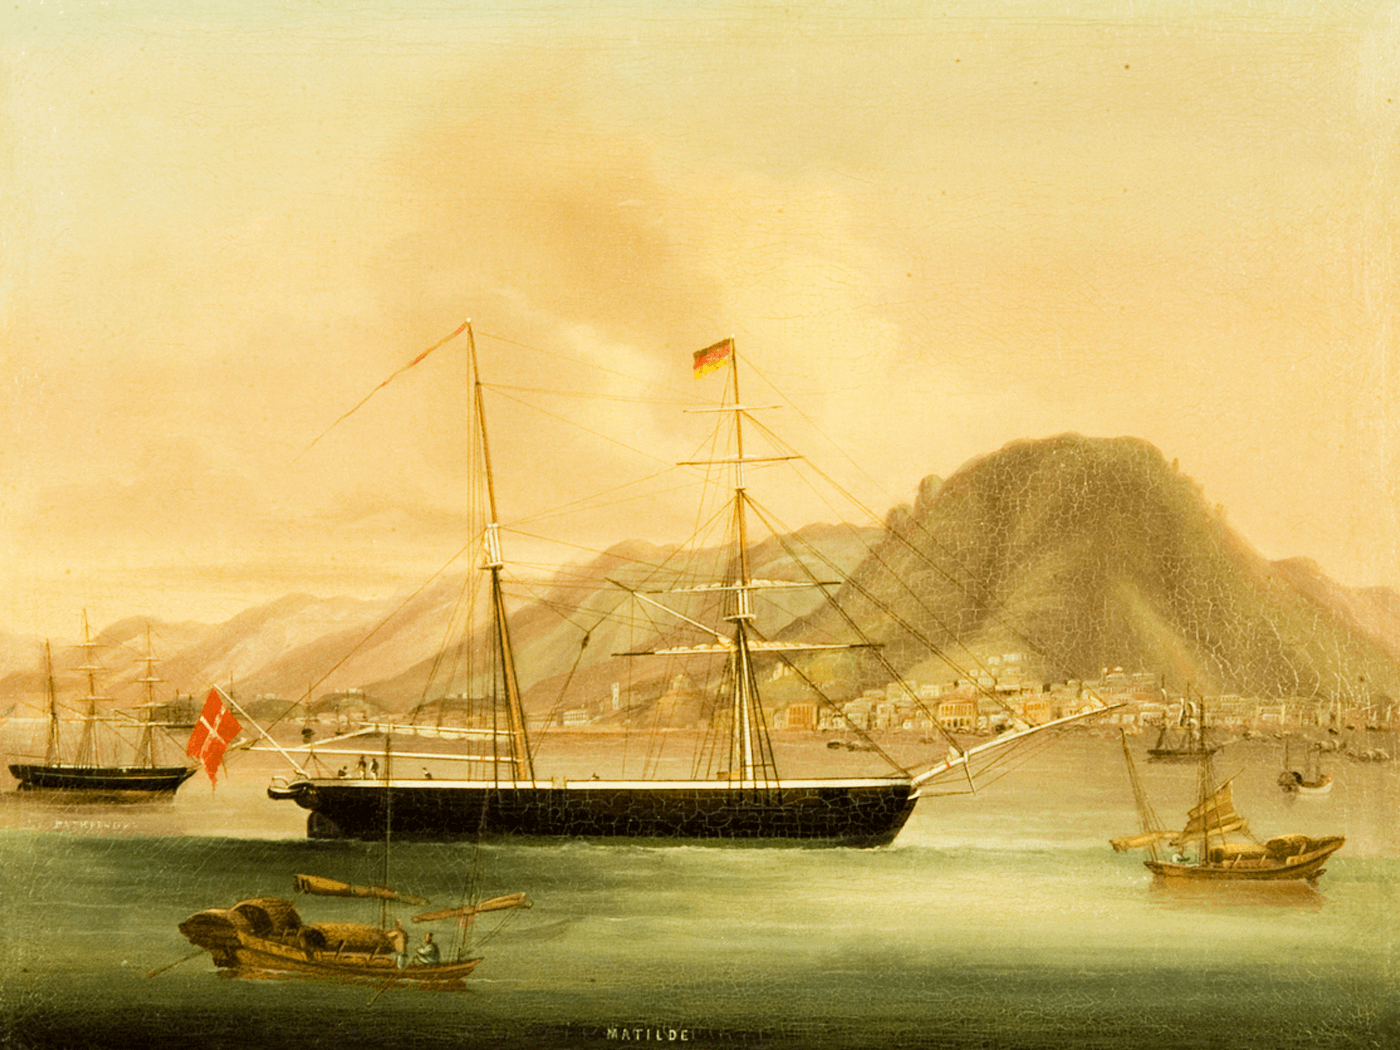 The Matilde moored in Hong Kong Harbour